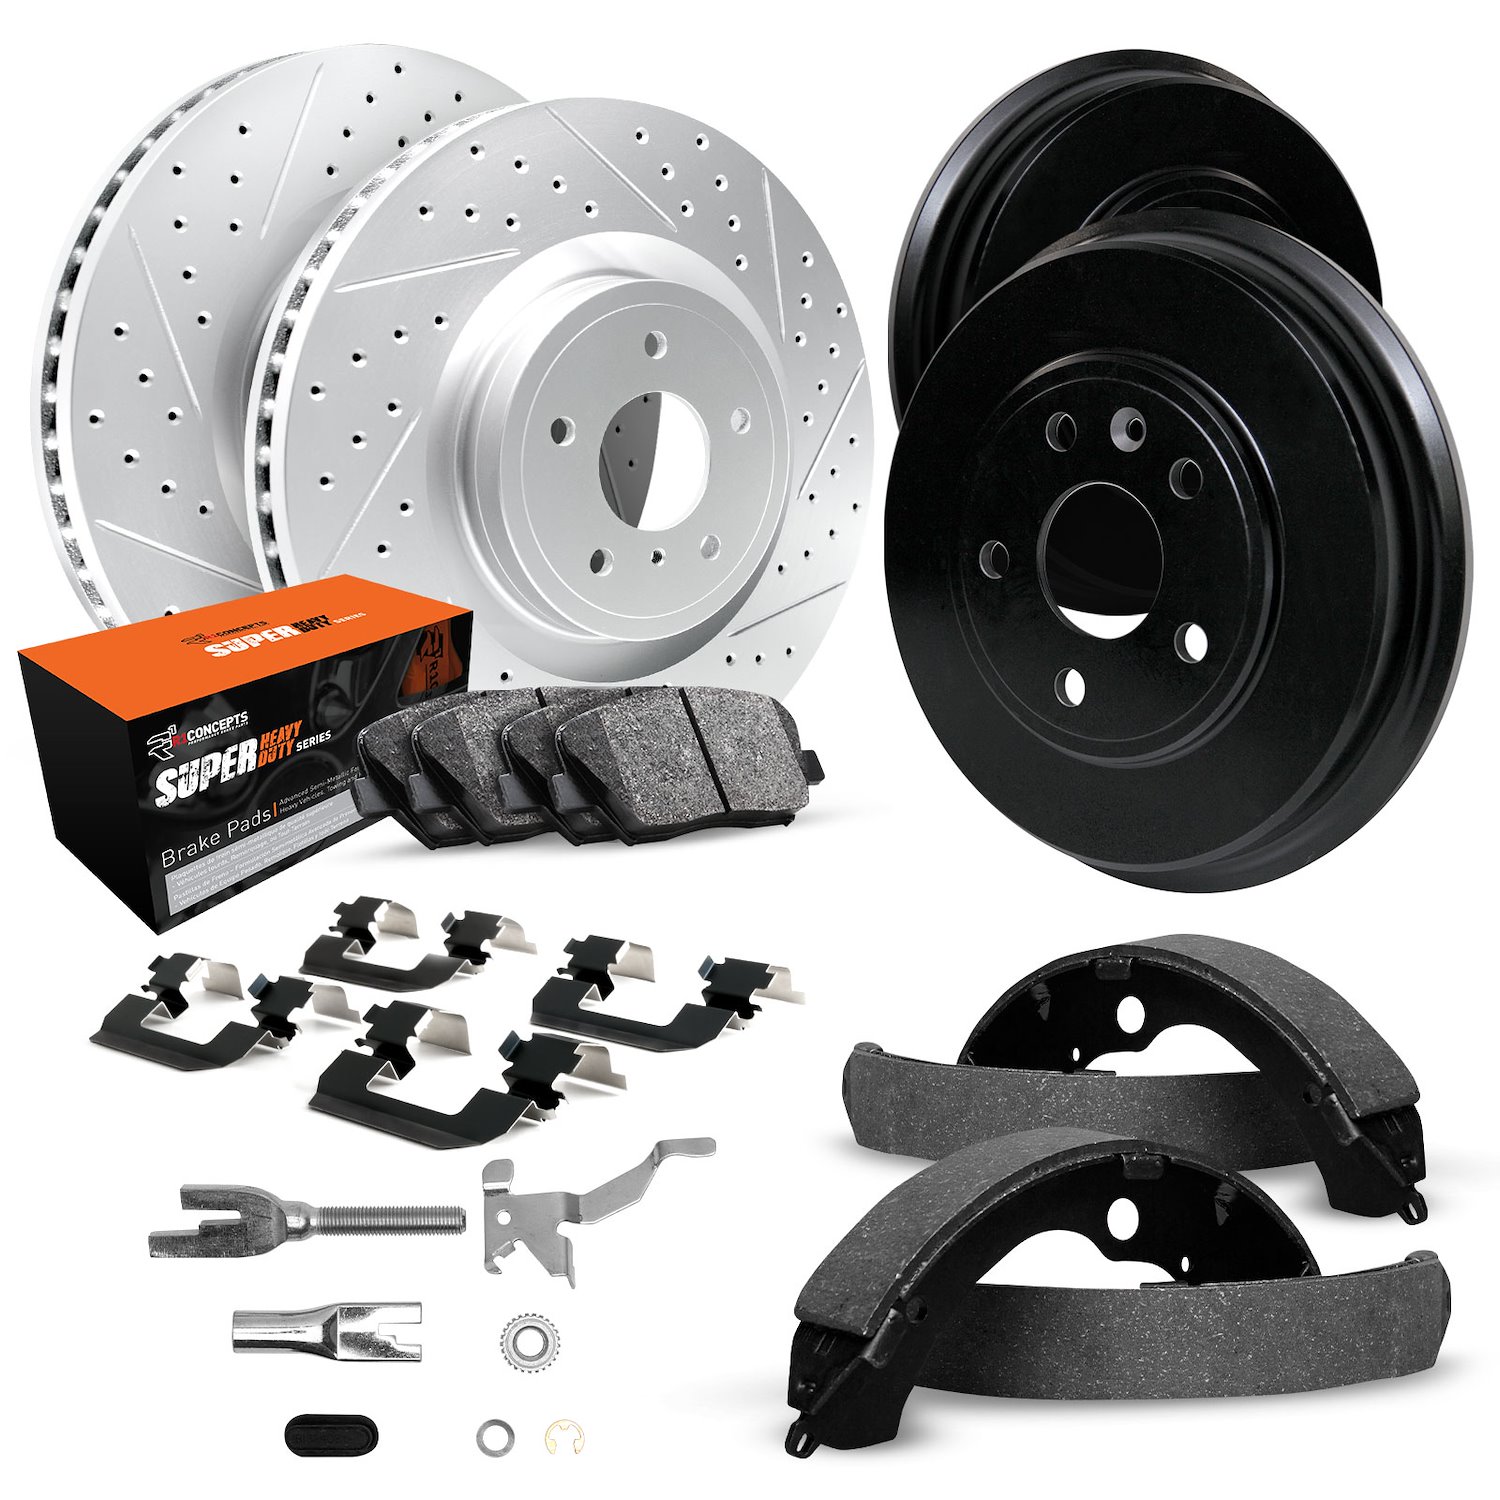 GEO-Carbon Drilled/Slotted Rotors/Drums w/Super-Duty Pads/Shoes/Hardware/Adjusters, 1975-1975 GM, Position: Front/Rear